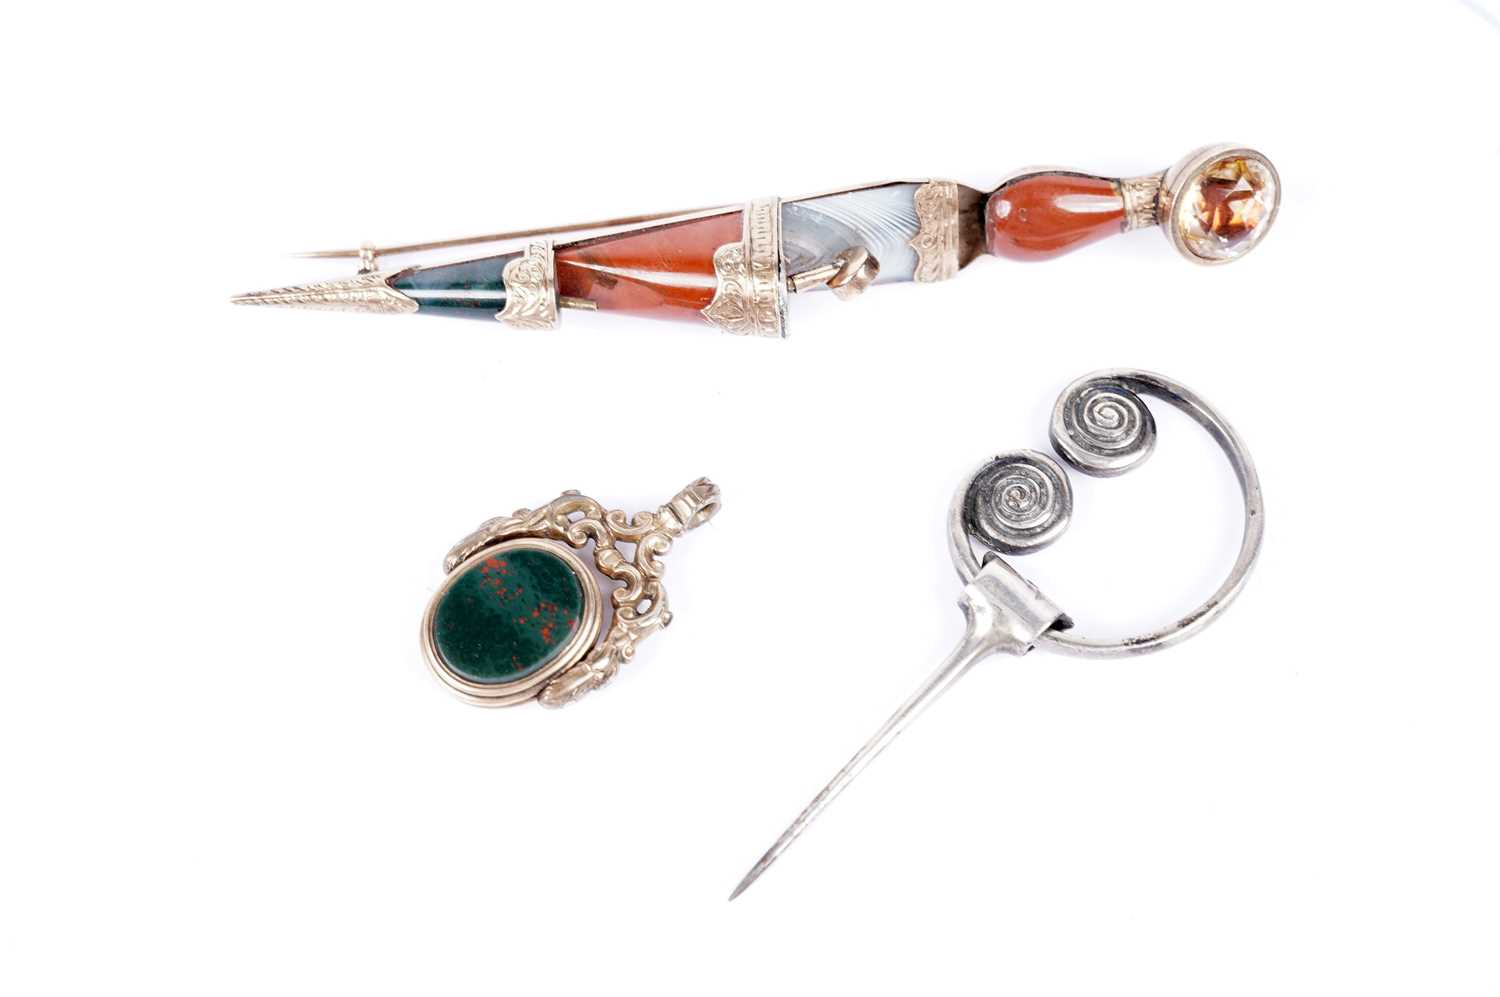 A Victorian plaid brooch; an Iona silver brooch by Alexander Ritchie; and a swivel fob